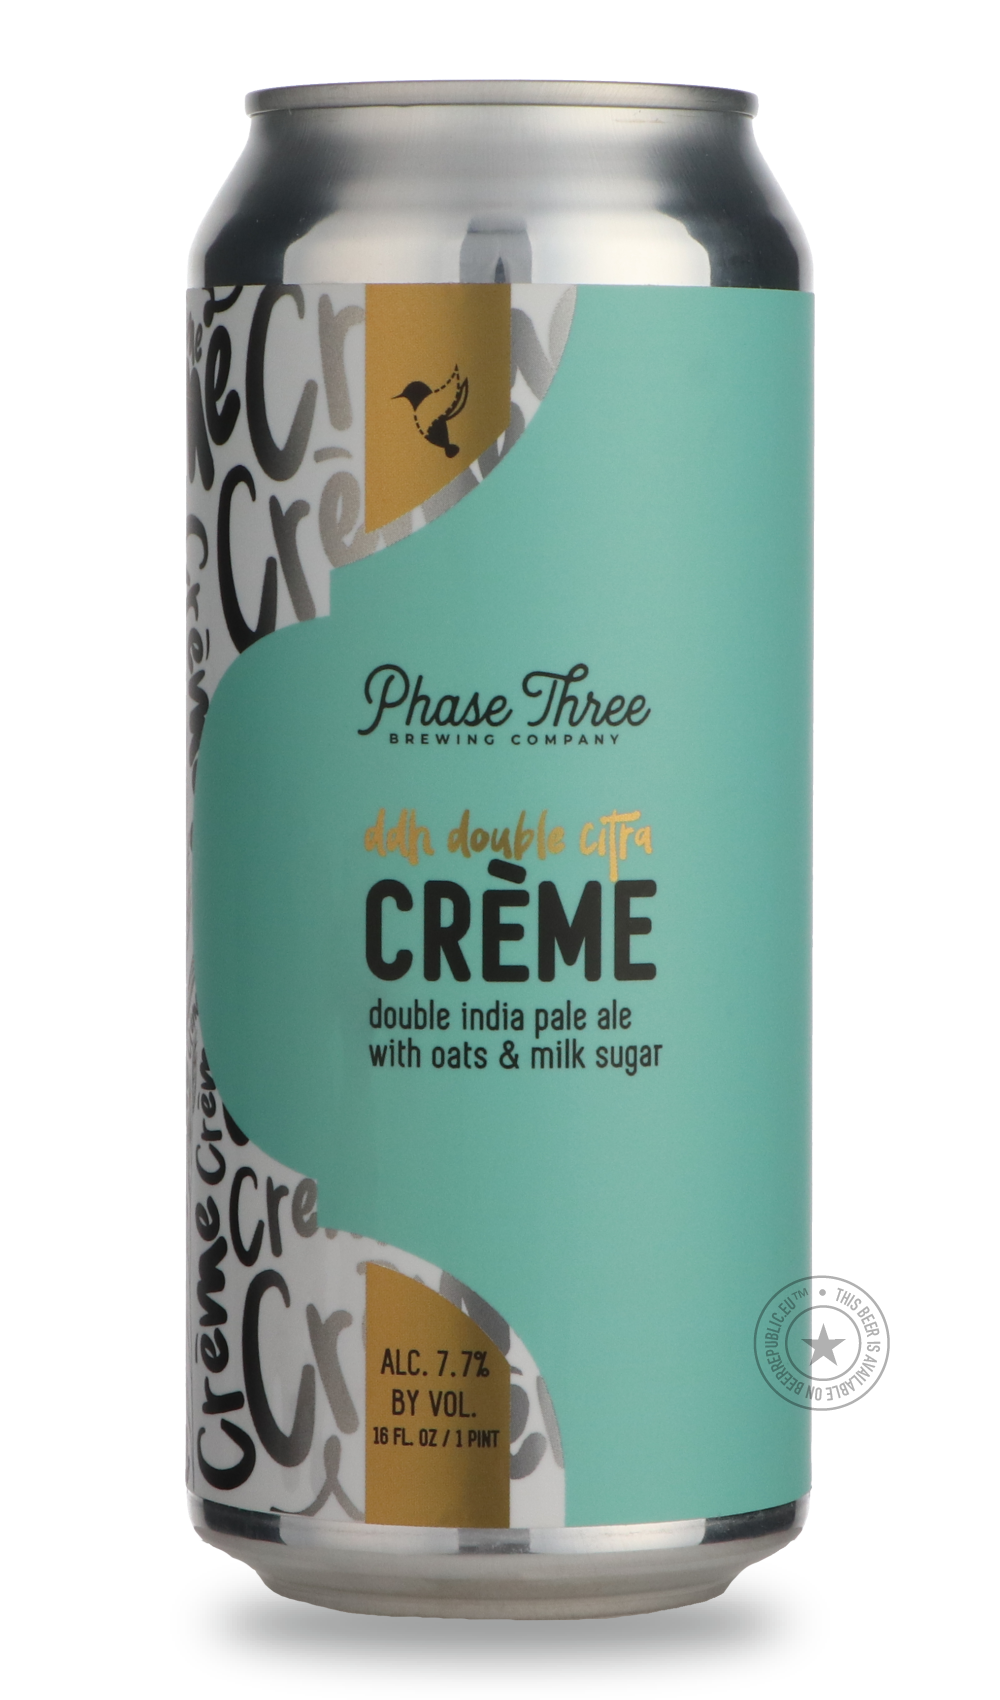 -Phase Three- DDH Double Citra Creme-IPA- Only @ Beer Republic - The best online beer store for American & Canadian craft beer - Buy beer online from the USA and Canada - Bier online kopen - Amerikaans bier kopen - Craft beer store - Craft beer kopen - Amerikanisch bier kaufen - Bier online kaufen - Acheter biere online - IPA - Stout - Porter - New England IPA - Hazy IPA - Imperial Stout - Barrel Aged - Barrel Aged Imperial Stout - Brown - Dark beer - Blond - Blonde - Pilsner - Lager - Wheat - Weizen - Ambe